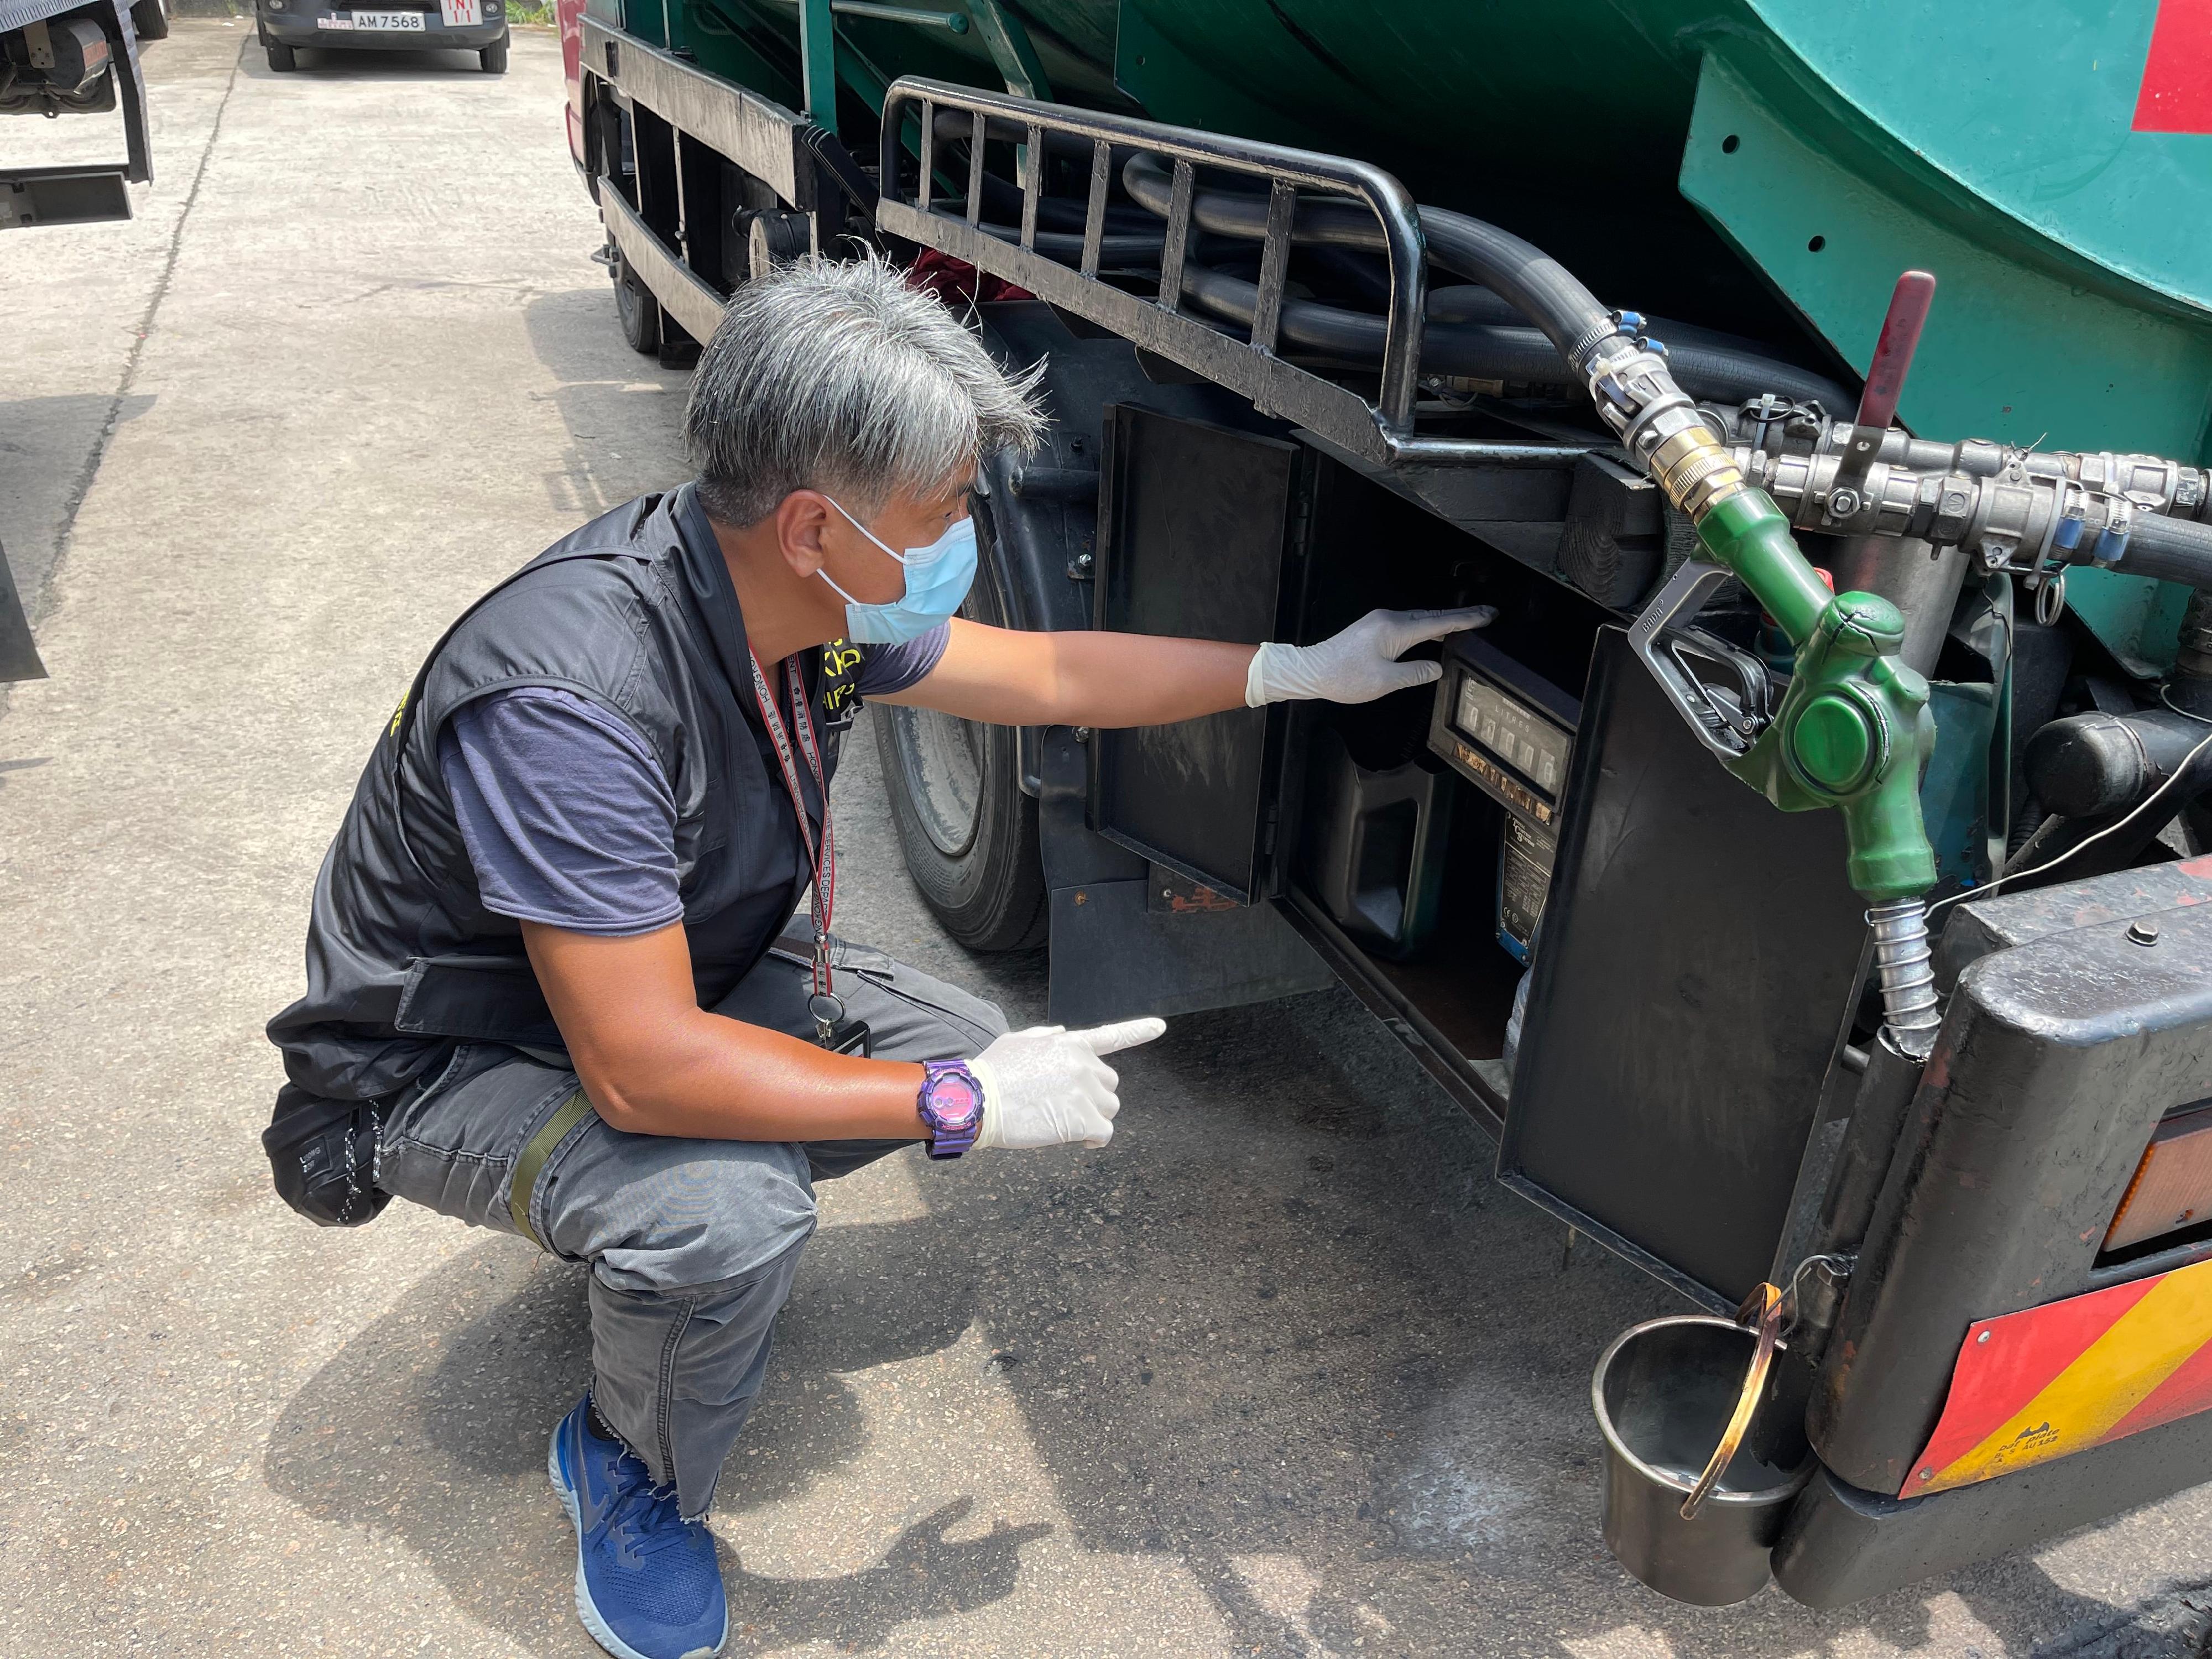 The Fire Services Department (FSD), the Hong Kong Police Force and Hong Kong Customs mounted a territory-wide joint operation codenamed "Strong Thunder" to combat illicit fuelling activities today (April 20). Photo shows FSD law enforcement officers inspecting a dangerous goods vehicle suspected to be involved in illicit fuelling activities during the joint operation.